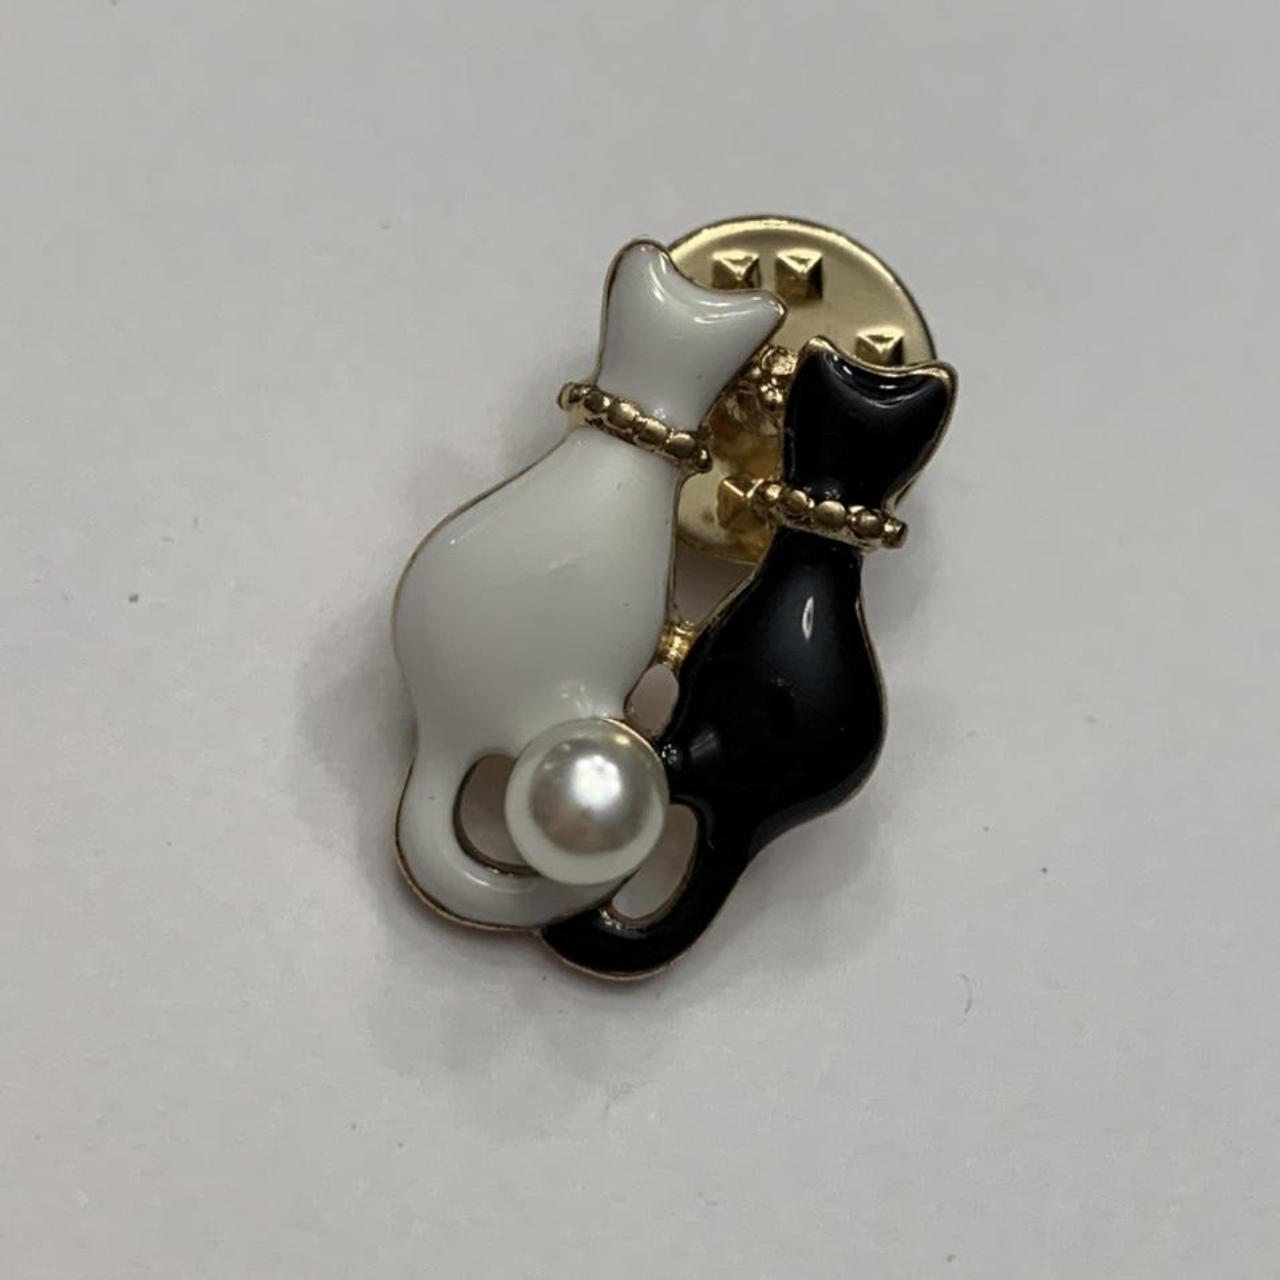 Unbranded Women's Black and White Jewellery (2)